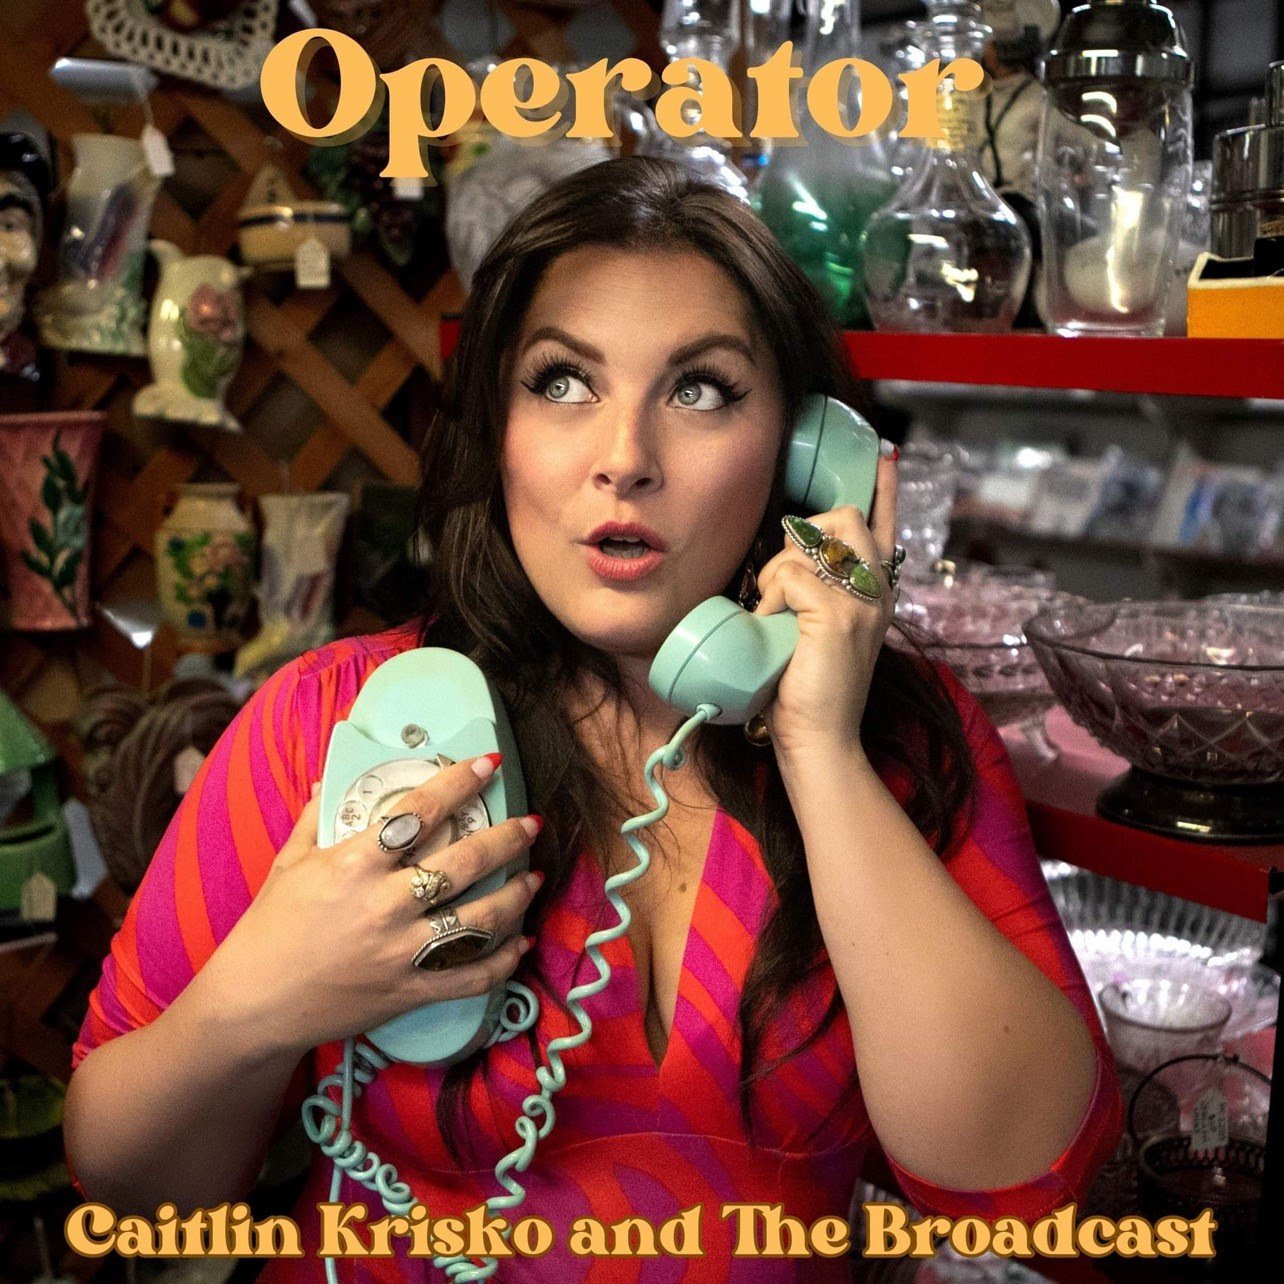 Check out the rave reviews for "Operator" by Caitlin Krisko & The Broadcast